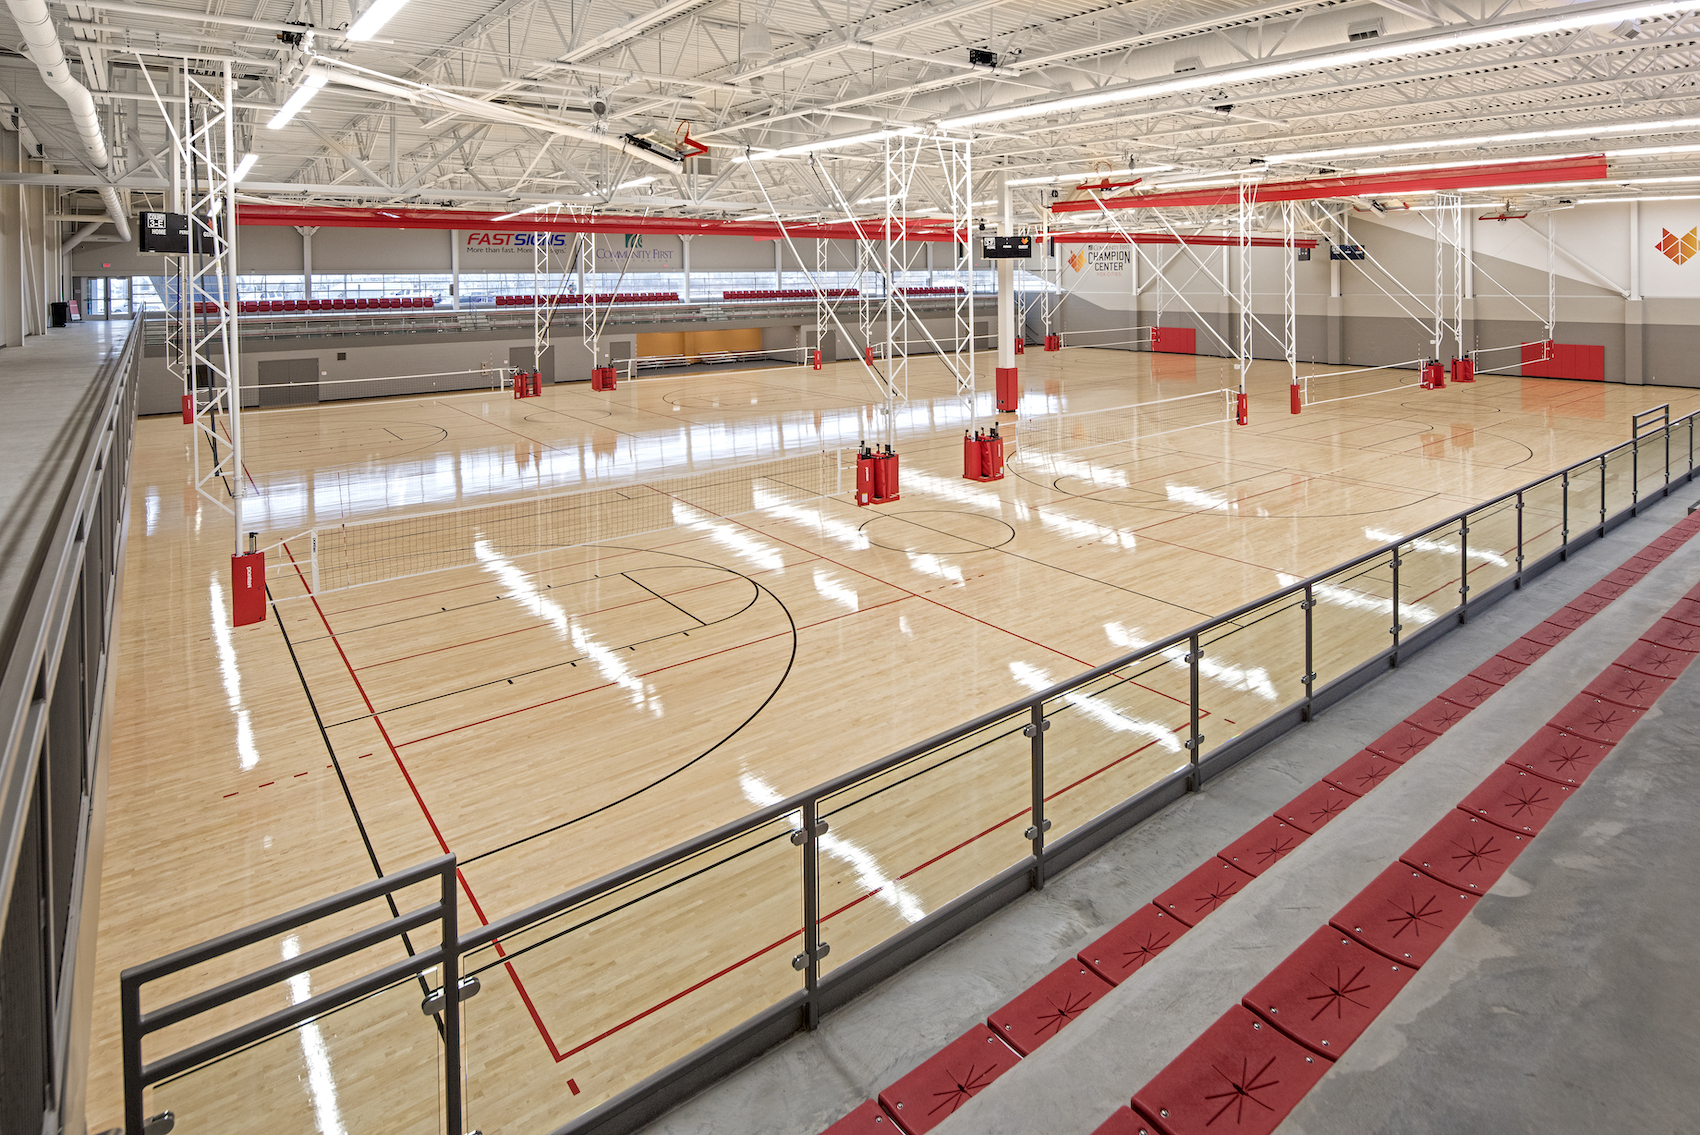 Creating an 'OpenTable for athletic facilities